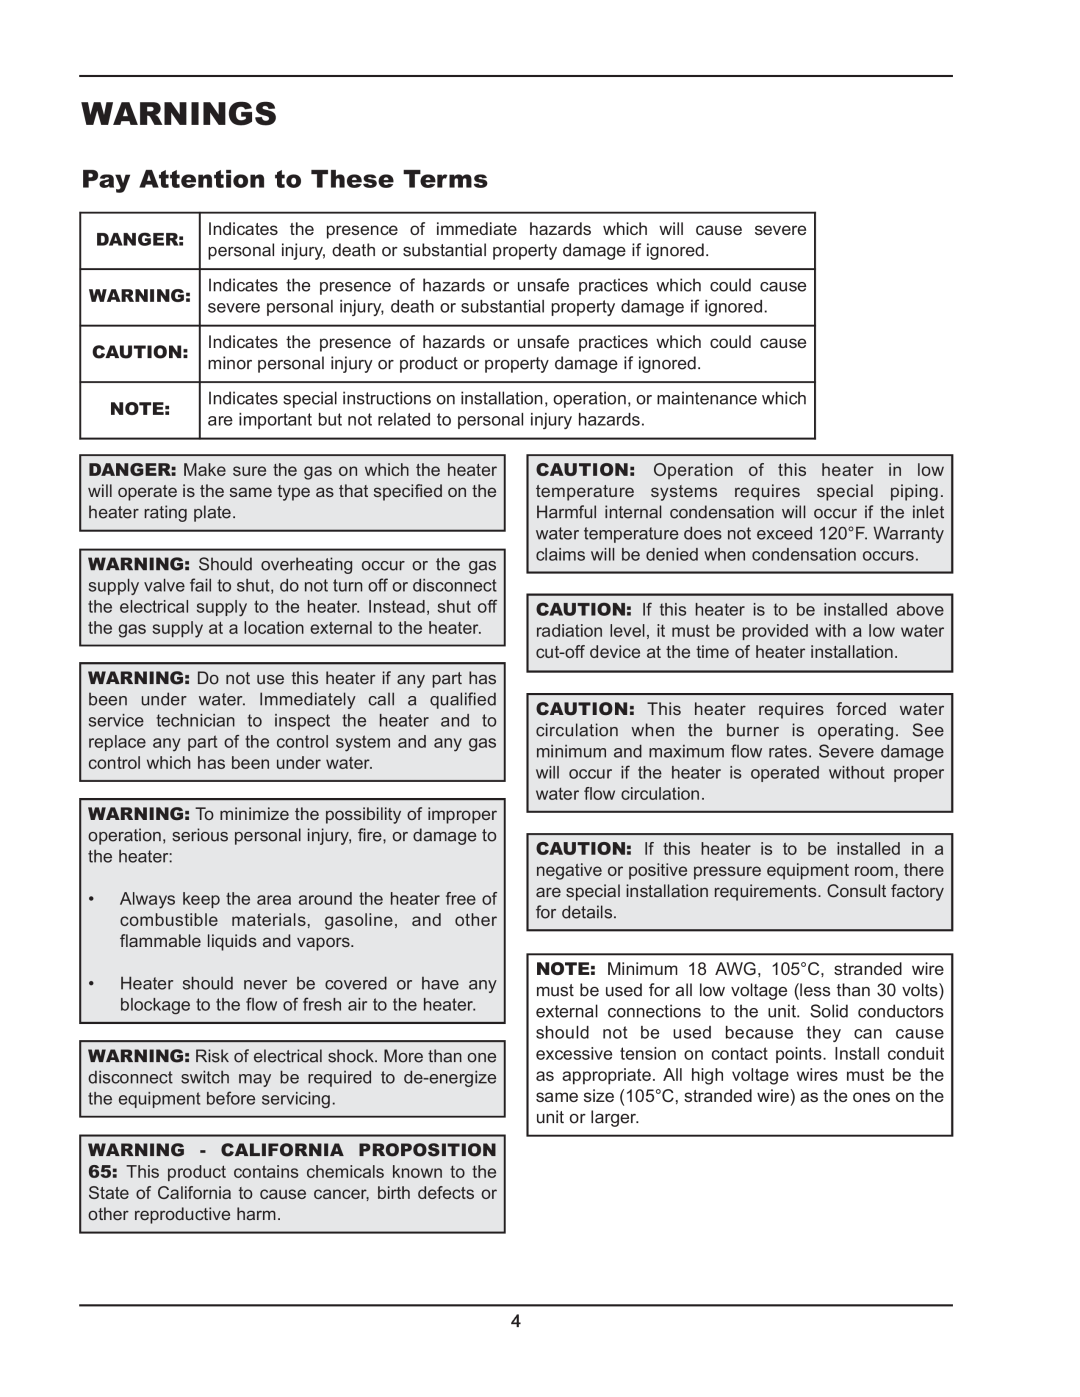 Raypak 5042004 operating instructions Warnings, Pay Attention to These Terms 